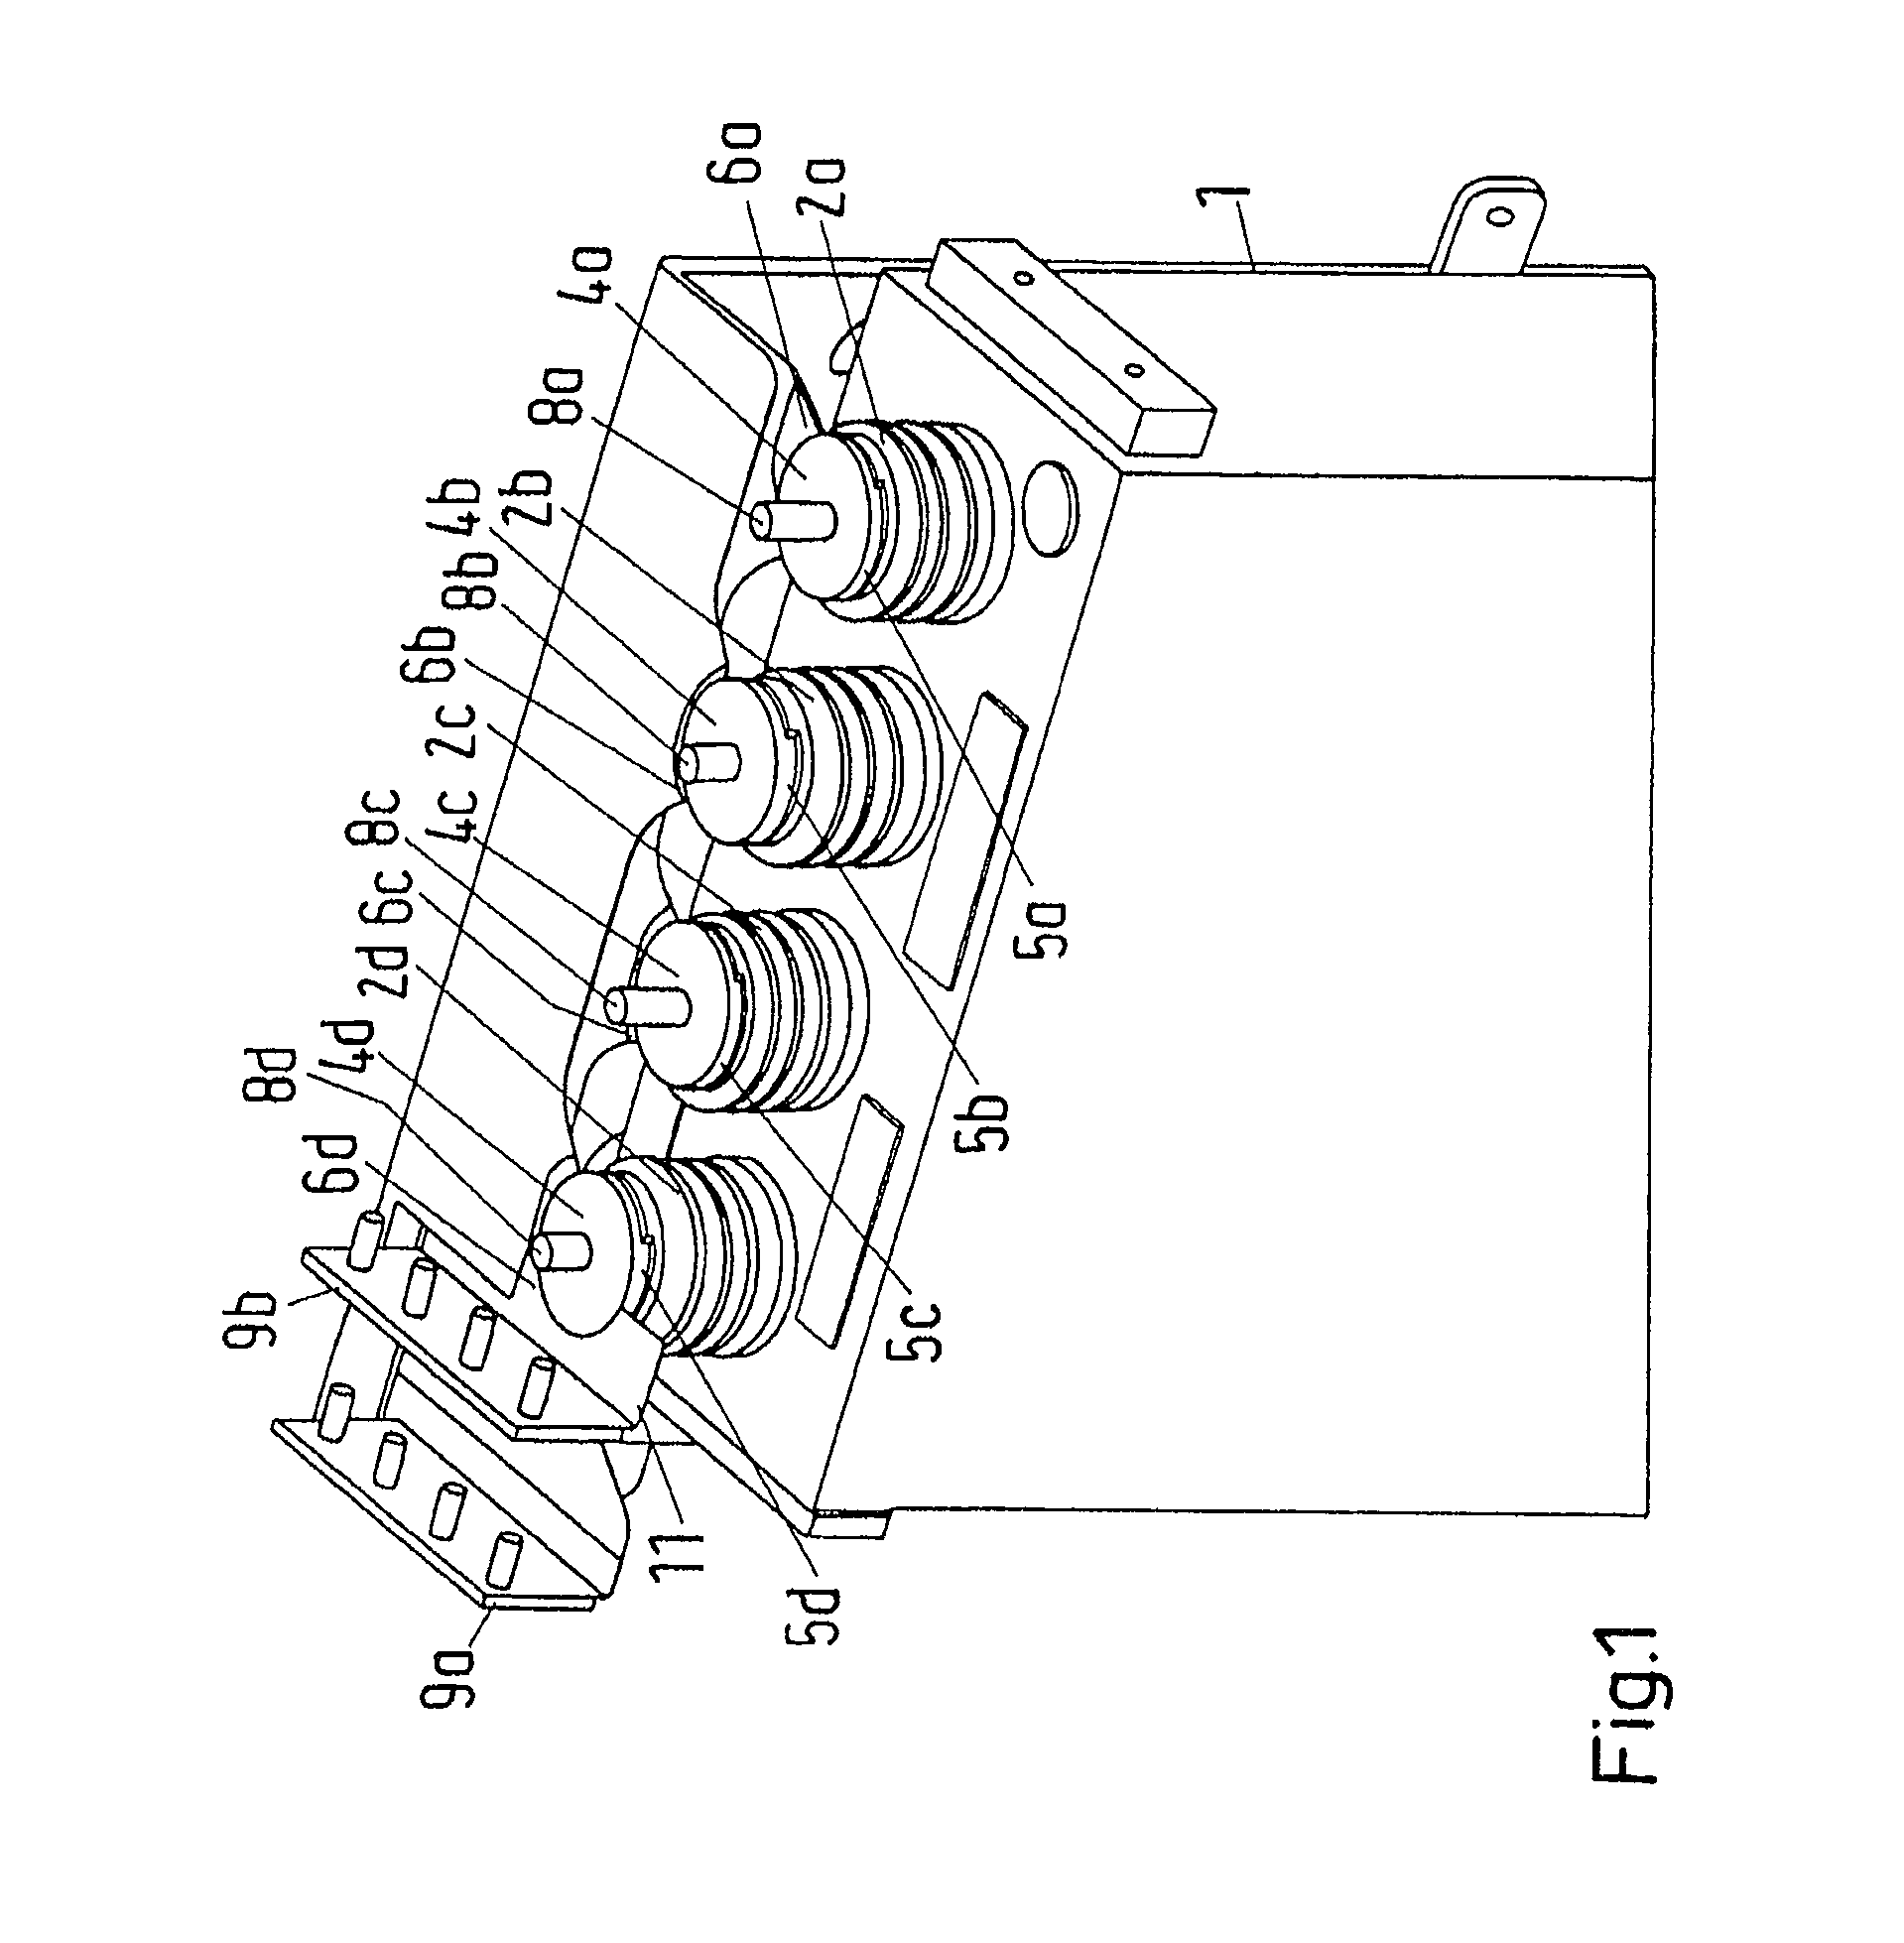 Electrically contacting an electrical component